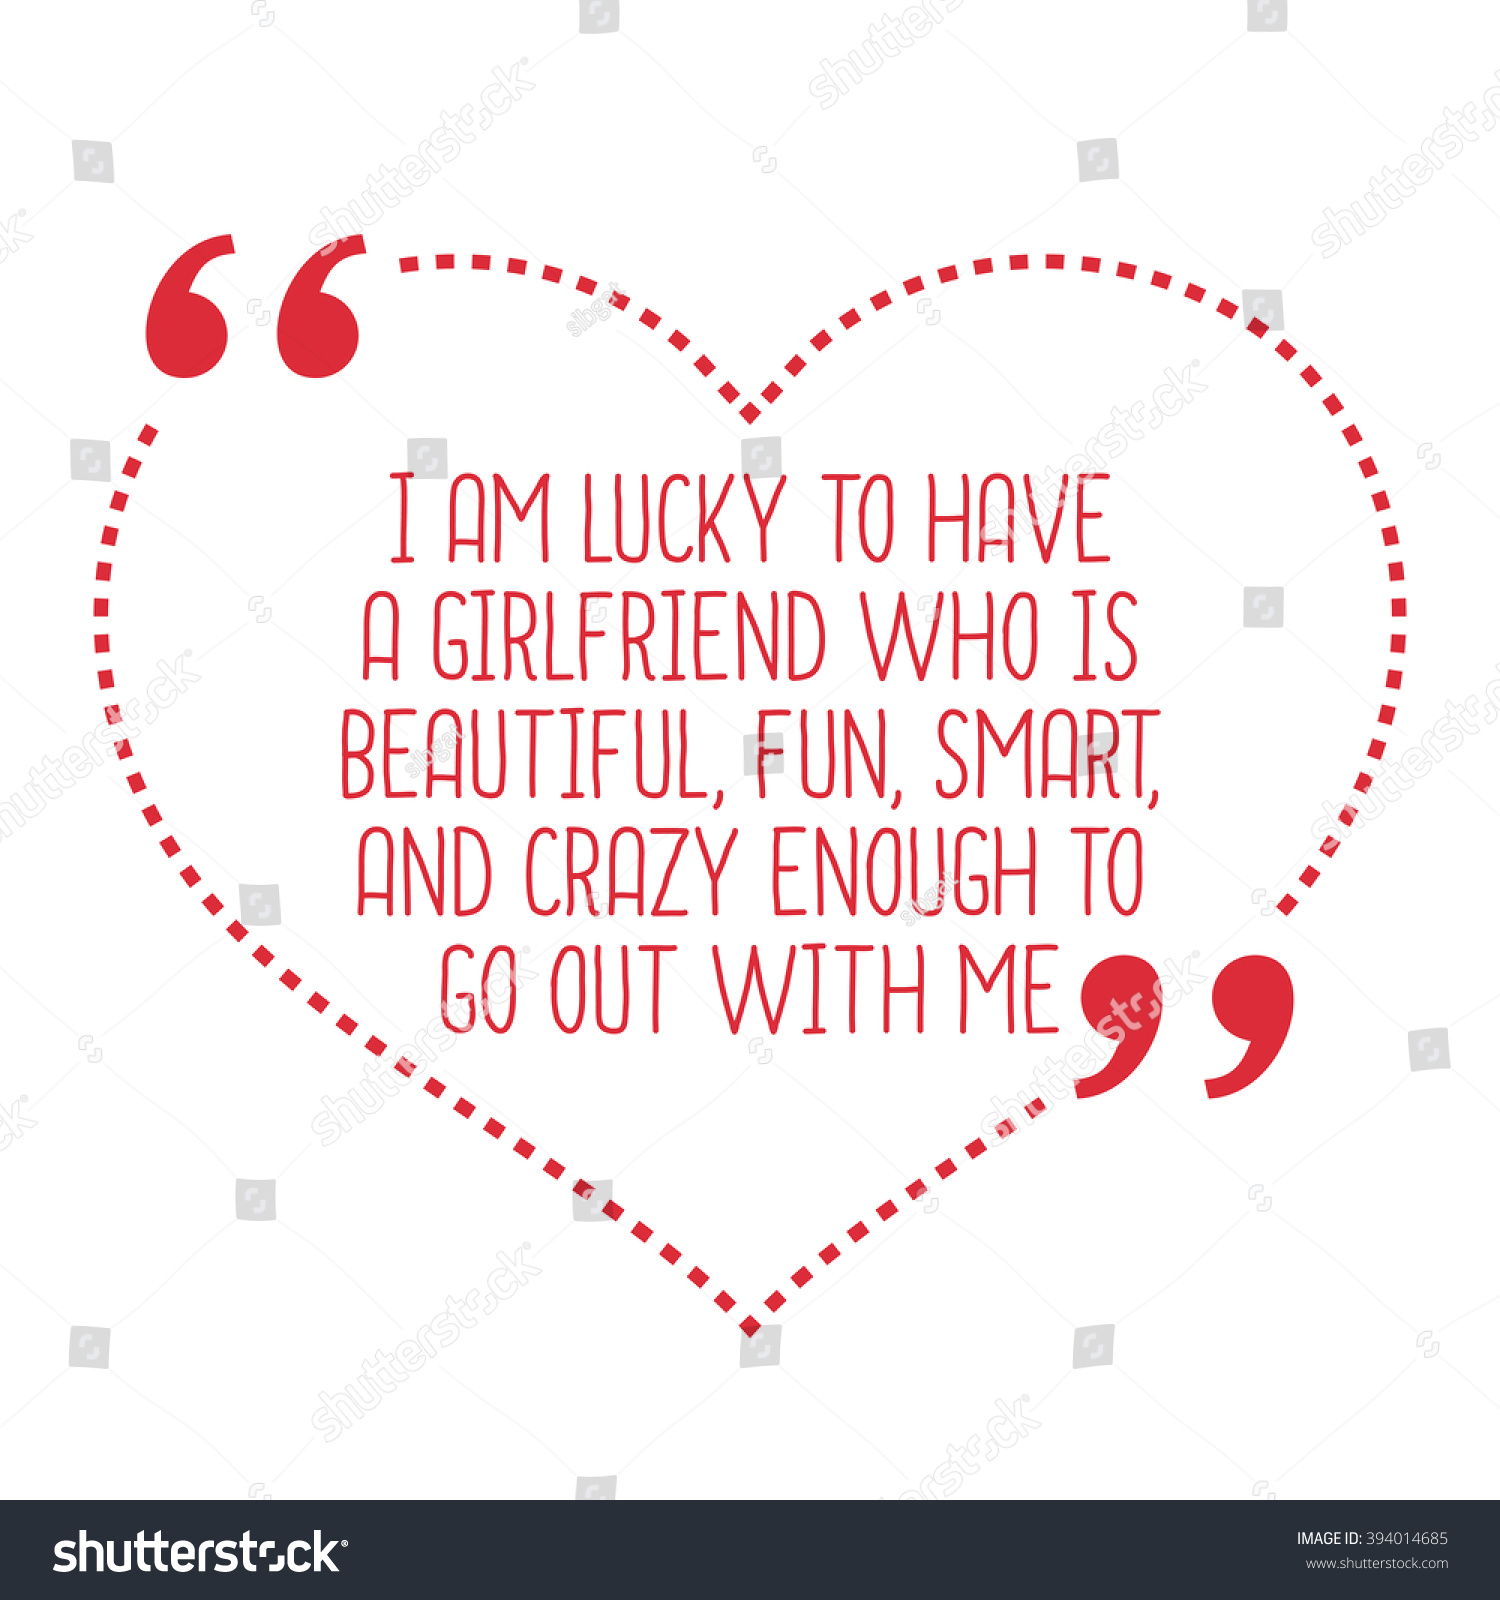 Funny love quote I am lucky to have a girlfriend who is beautiful fun